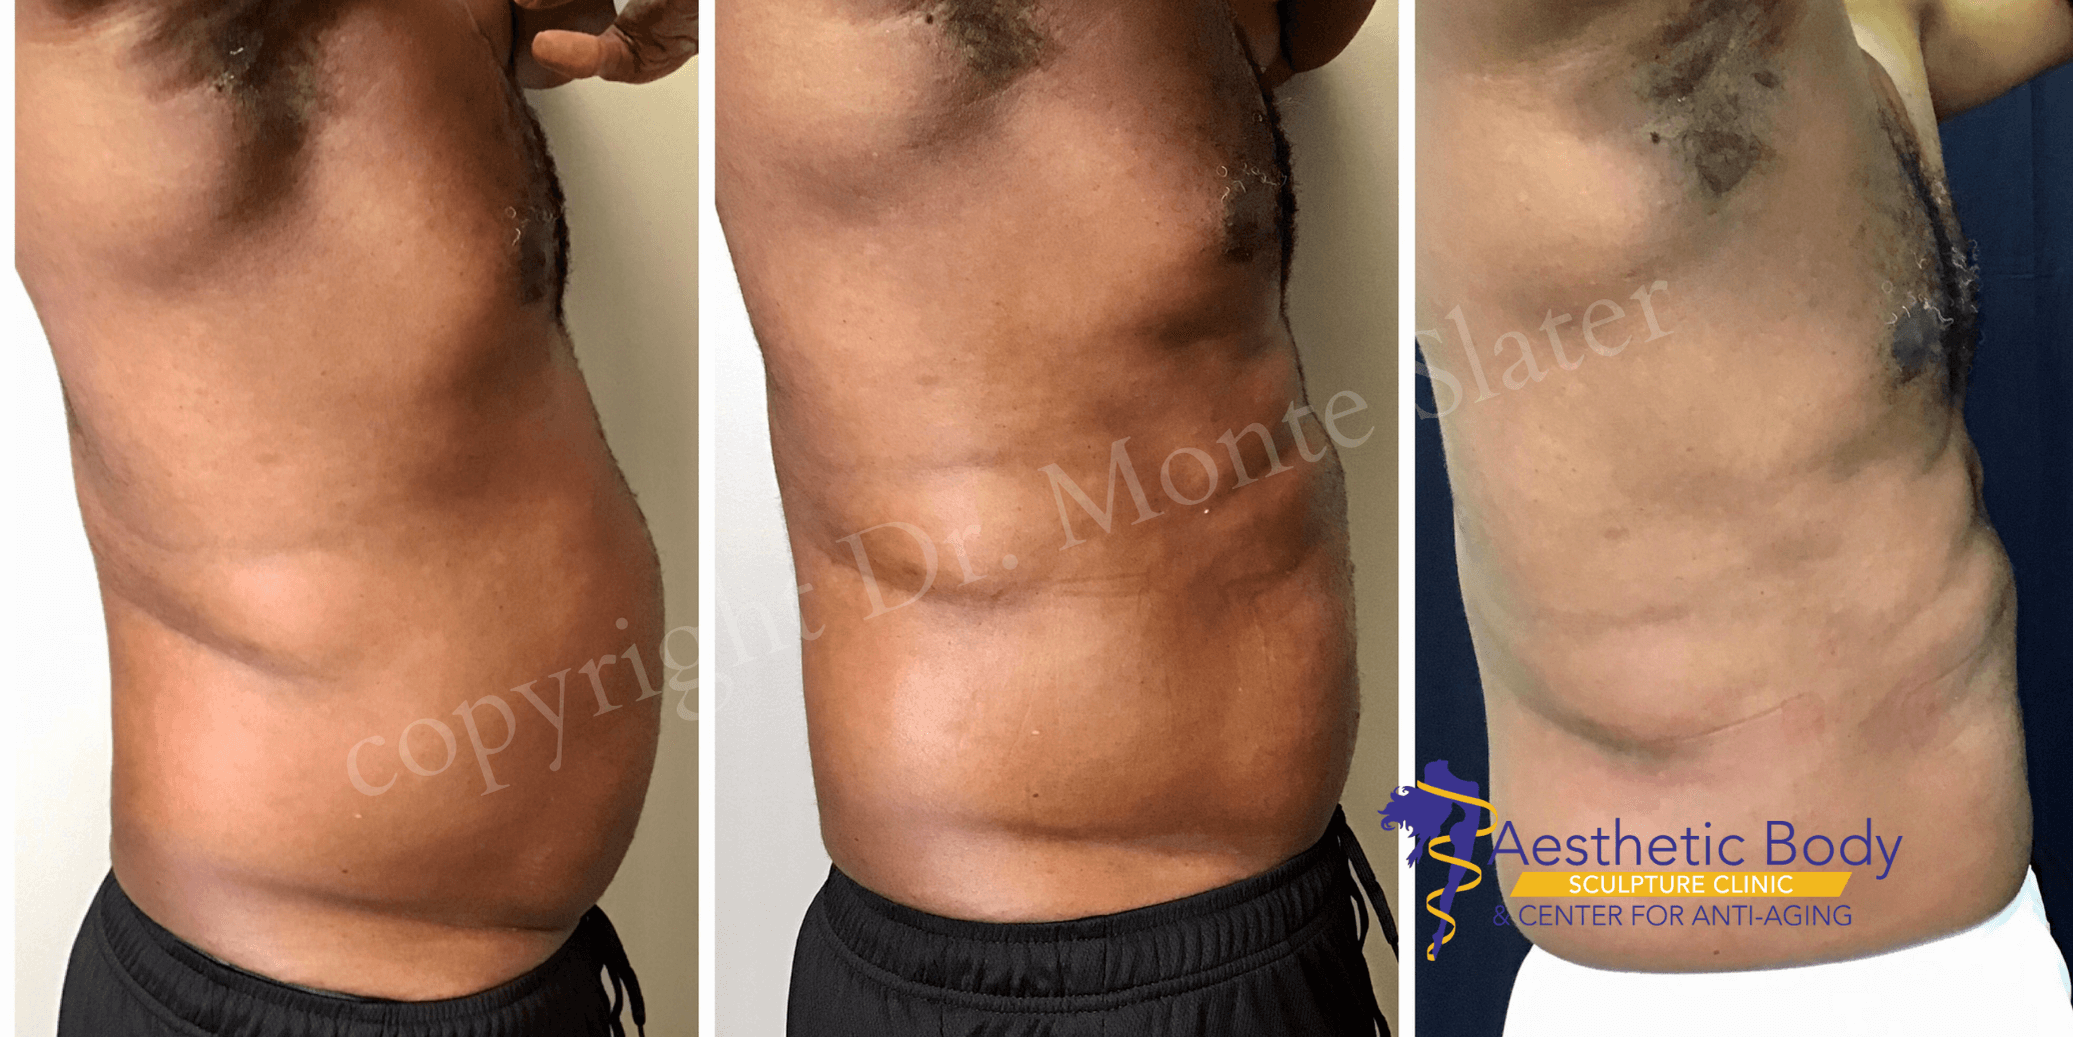 Before and After 2 PHYSIQ Body Contouring Treatments with Dr. Monte Slater